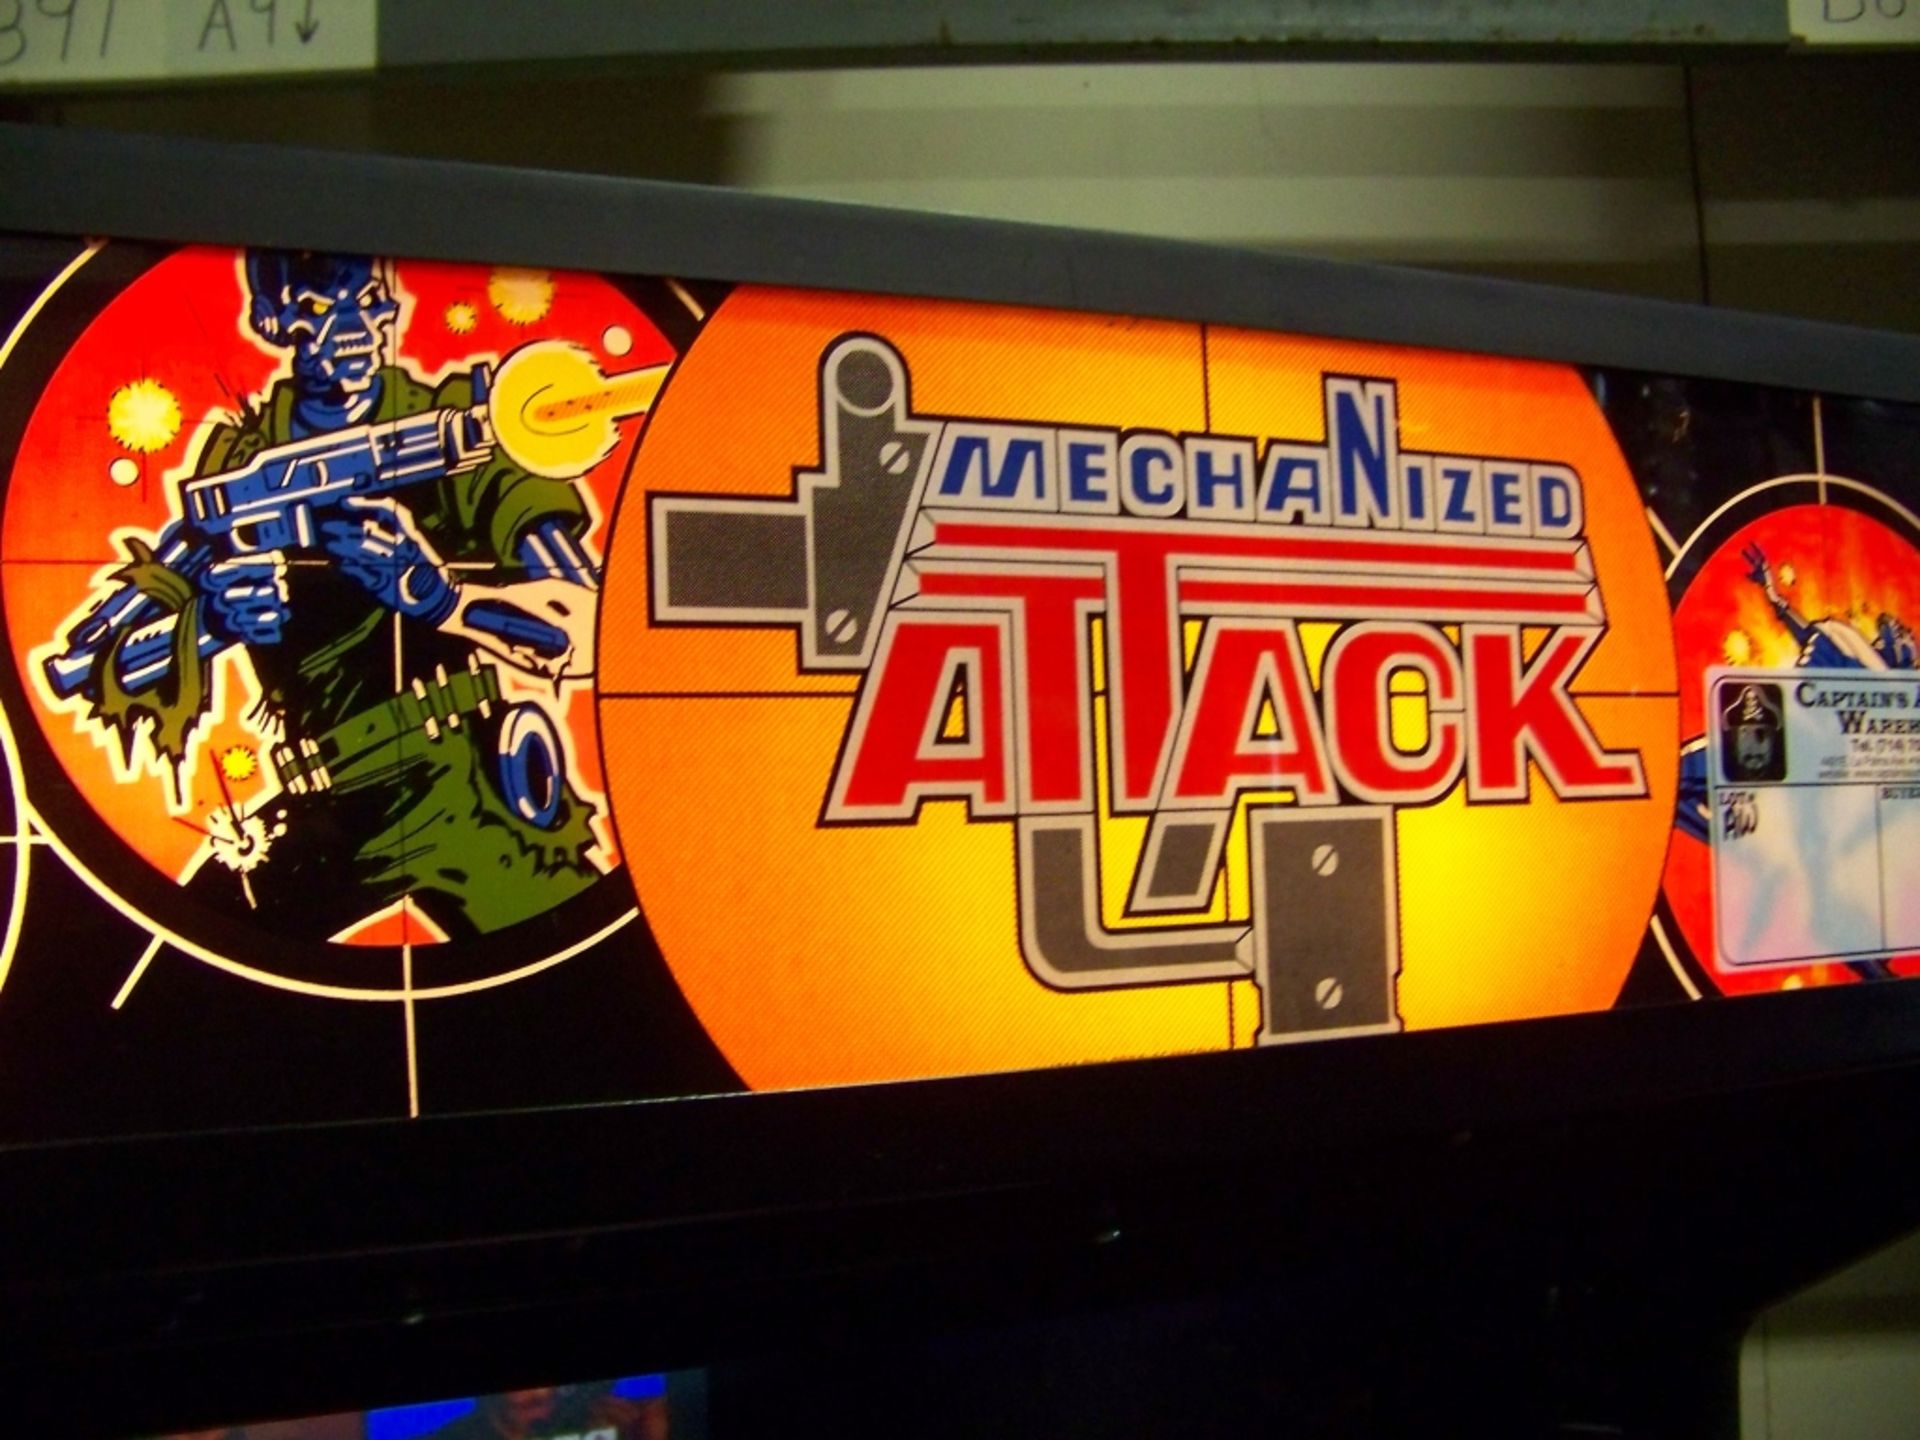 MECHANIZED ATTACK SNK FIXED GUN SHOOTER CLASSIC Item is in used condition. Evidence of wear and - Image 2 of 10